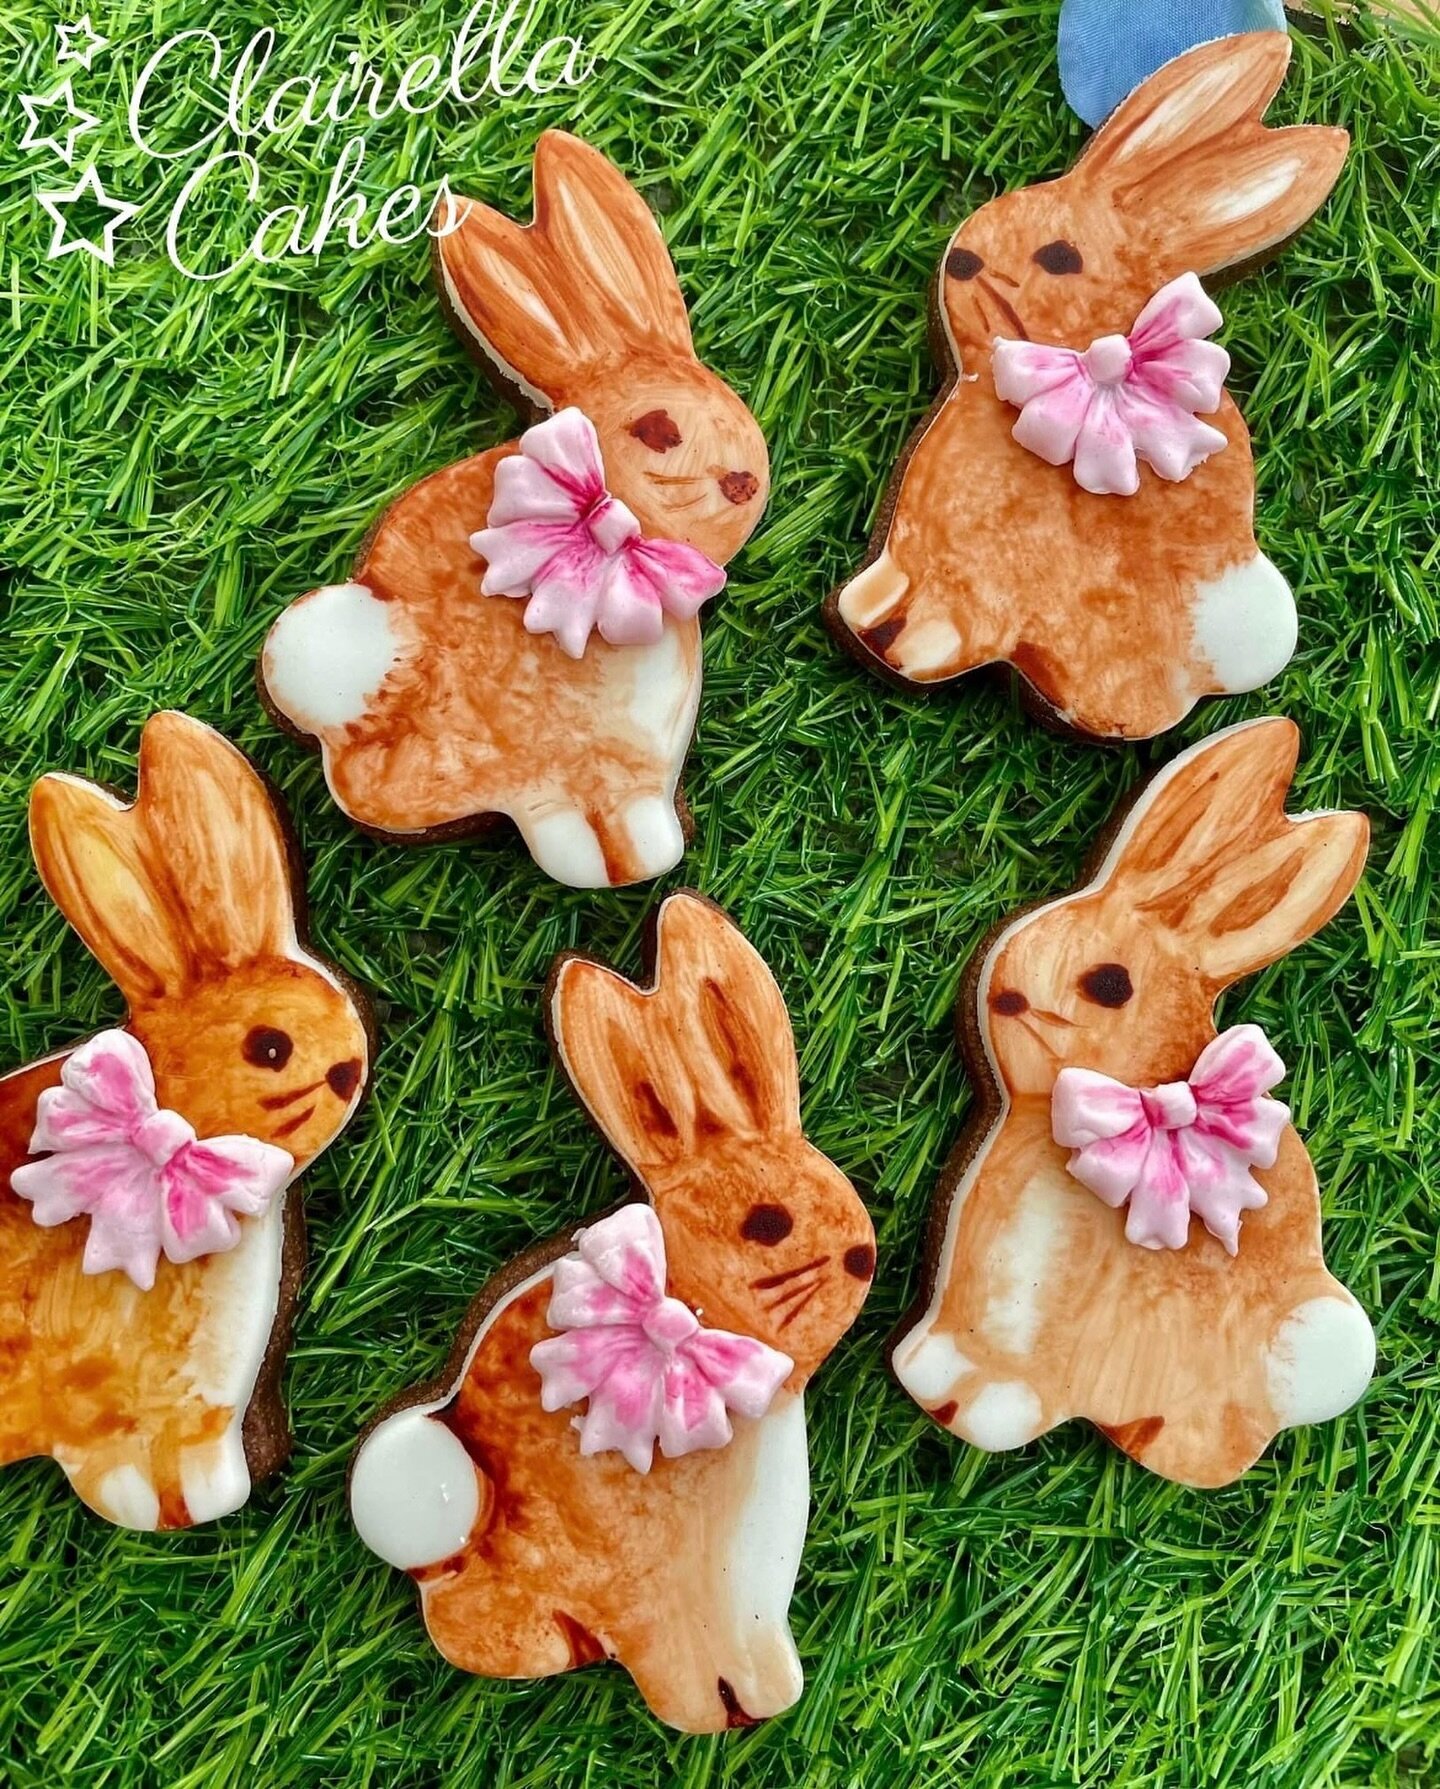 Did you know that a group of Bunnies is called a &ldquo;Fluffle&rdquo;? I think that&rsquo;s my new favourite word - Don&rsquo;t you just love the English language! 
Well here&rsquo;s a Fluffle of Hand Painted Chocolate Bunny Cookies - I made so many